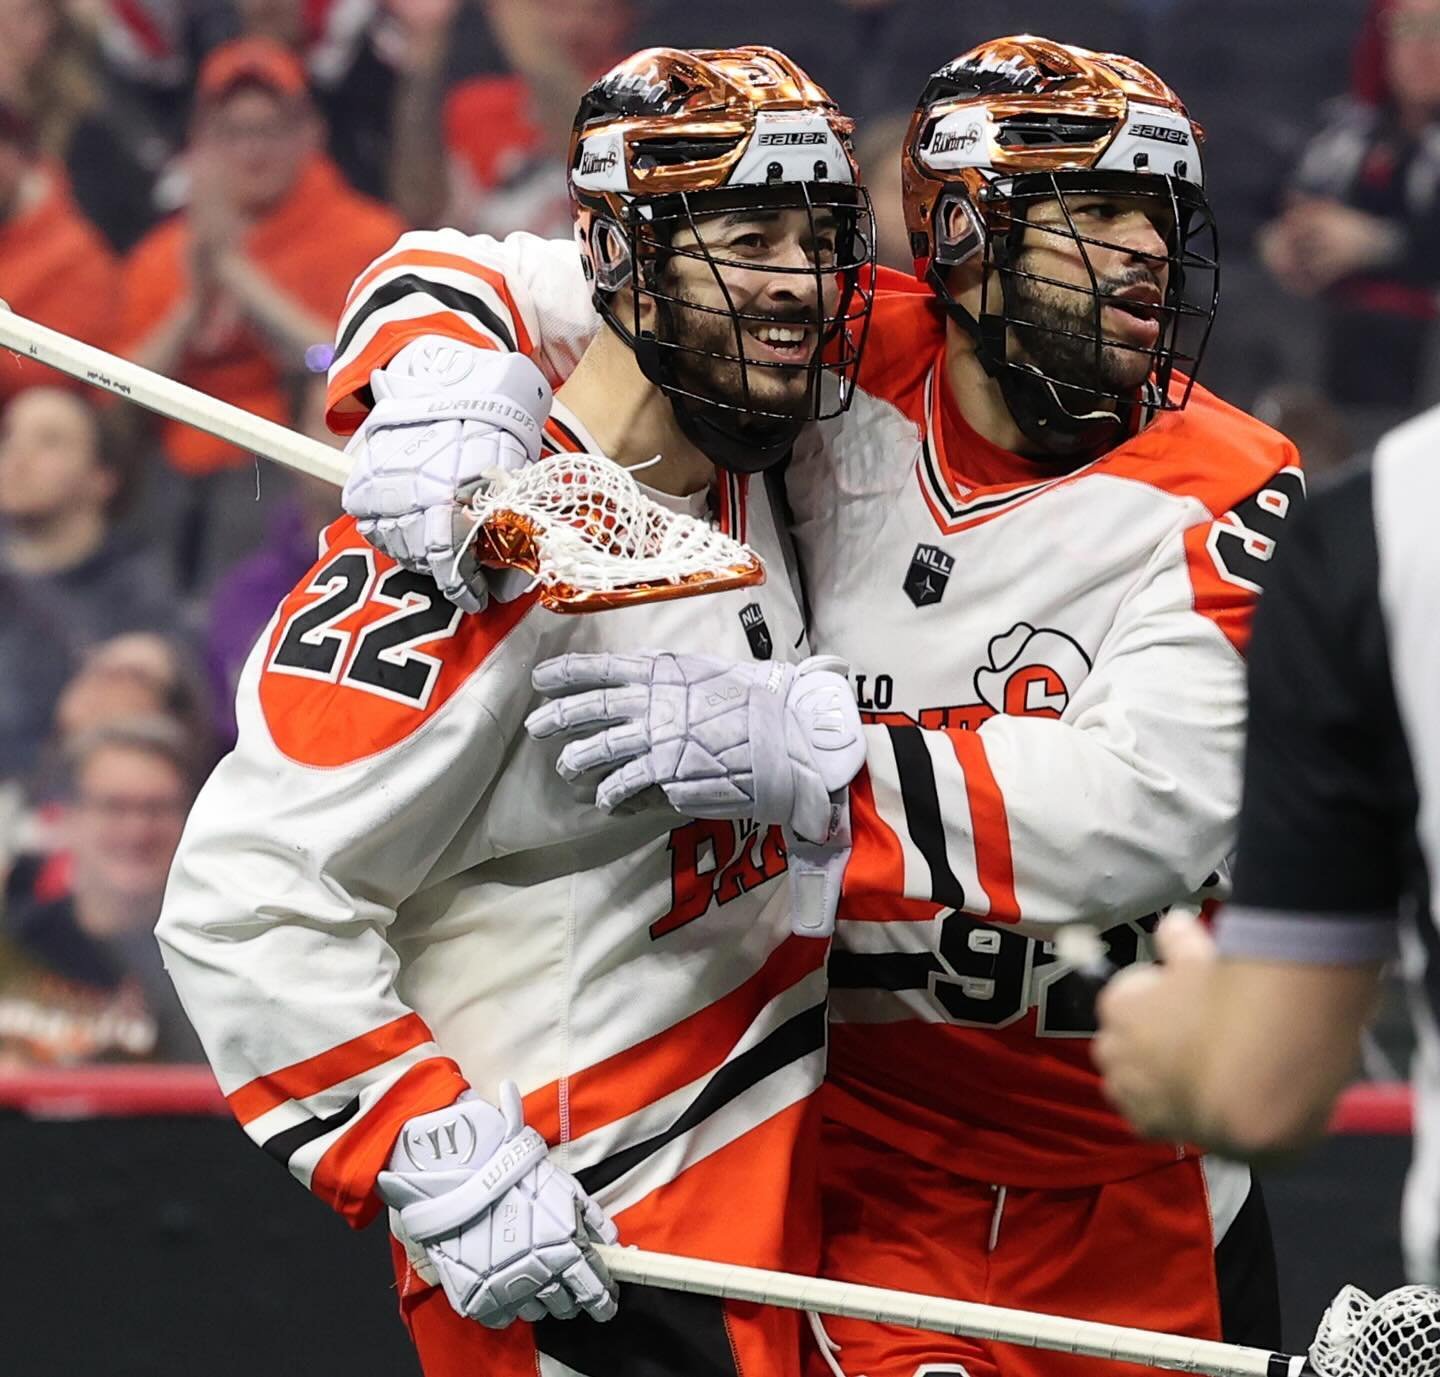 Since the NLL first started announcing three finalists for their various year-end awards in 2014, teammates have made the final three for MVP in almost half of those seasons:
&nbsp;
This year: Dhane Smith &amp; Josh Byrne, Buffalo
&nbsp;
2022: Dhane 